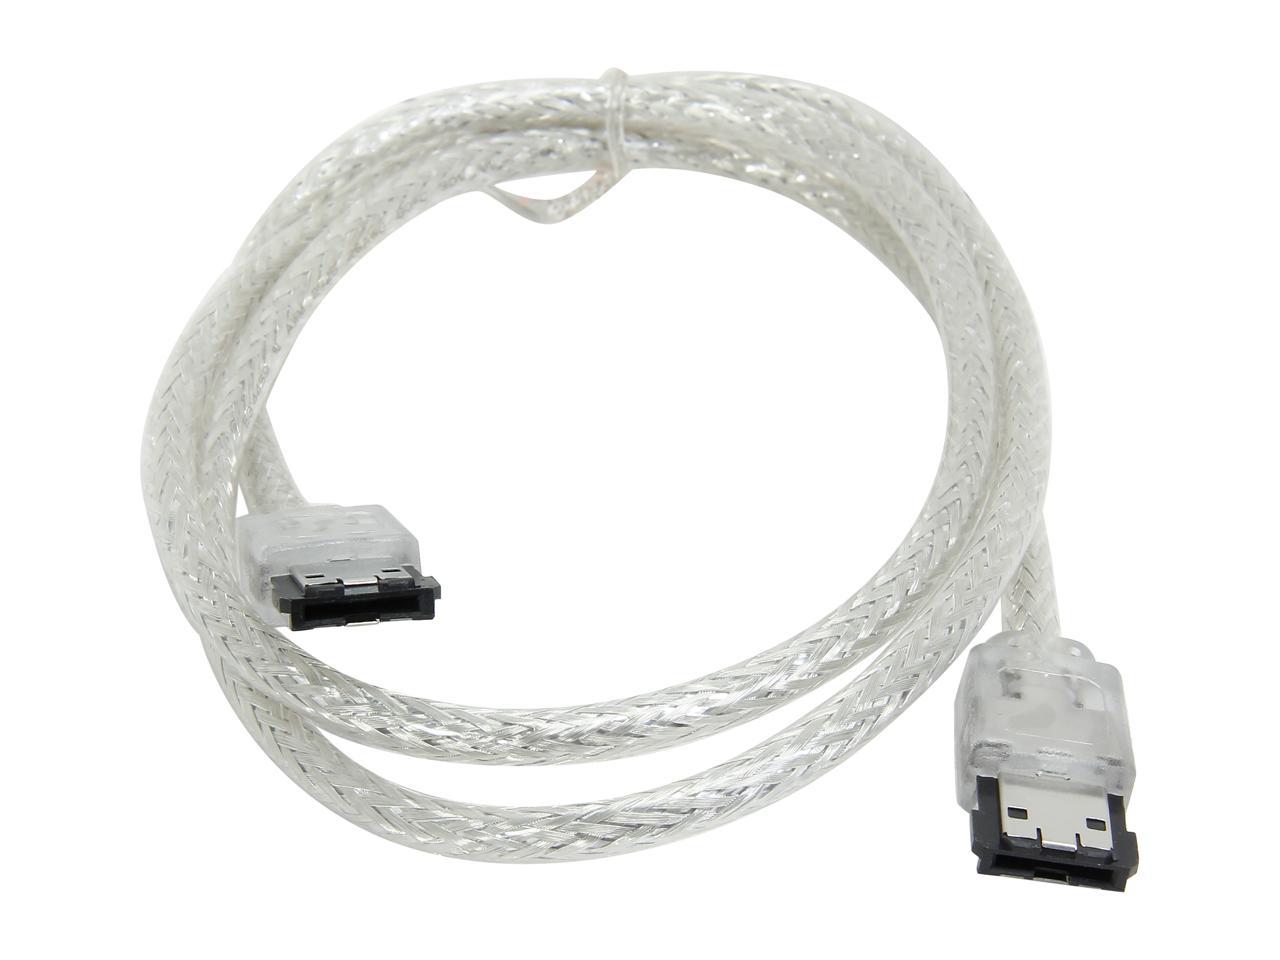 Nippon Labs ESATA3-EXS-3-llSL 3 ft. eSATA III(Type I) Male to Male Cable, Silver - image 2 of 3